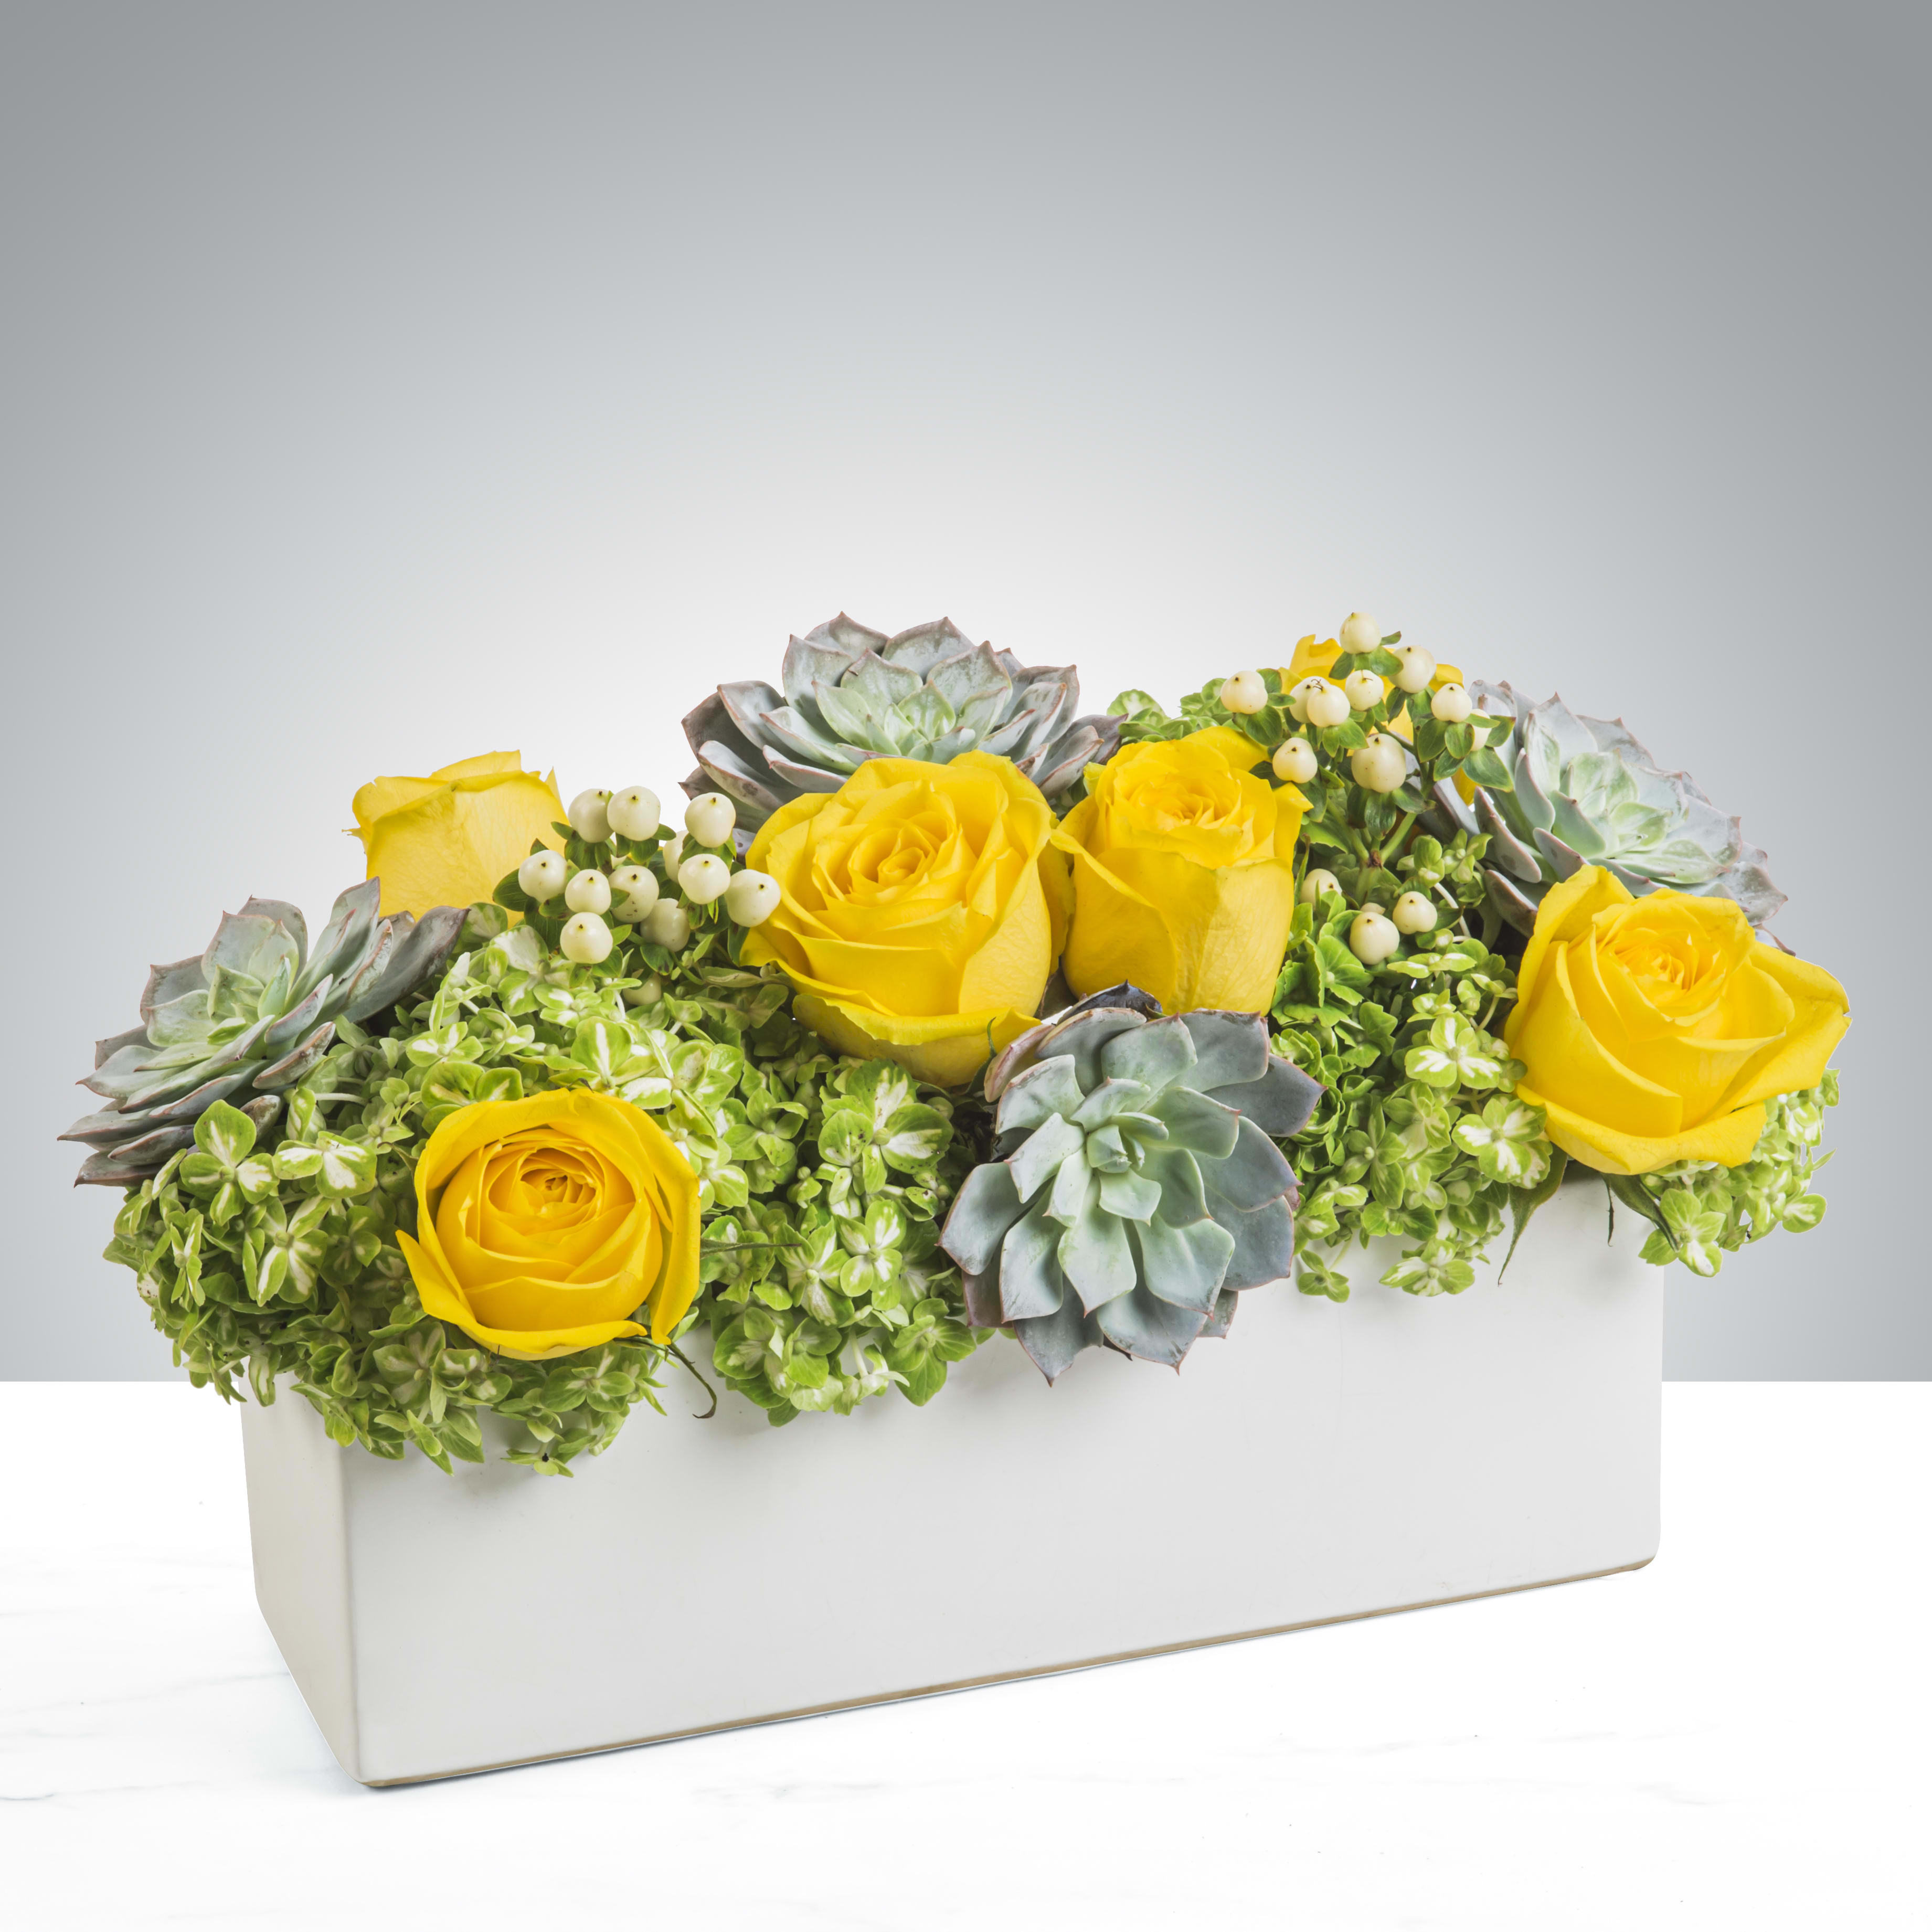 Mellow Yellow - Yellow roses with green succulents and a crisp white rectangular box, this arrangement brightens and soothes any space. Perfect for saying happy birthday, welcoming new babies and saying thank you.